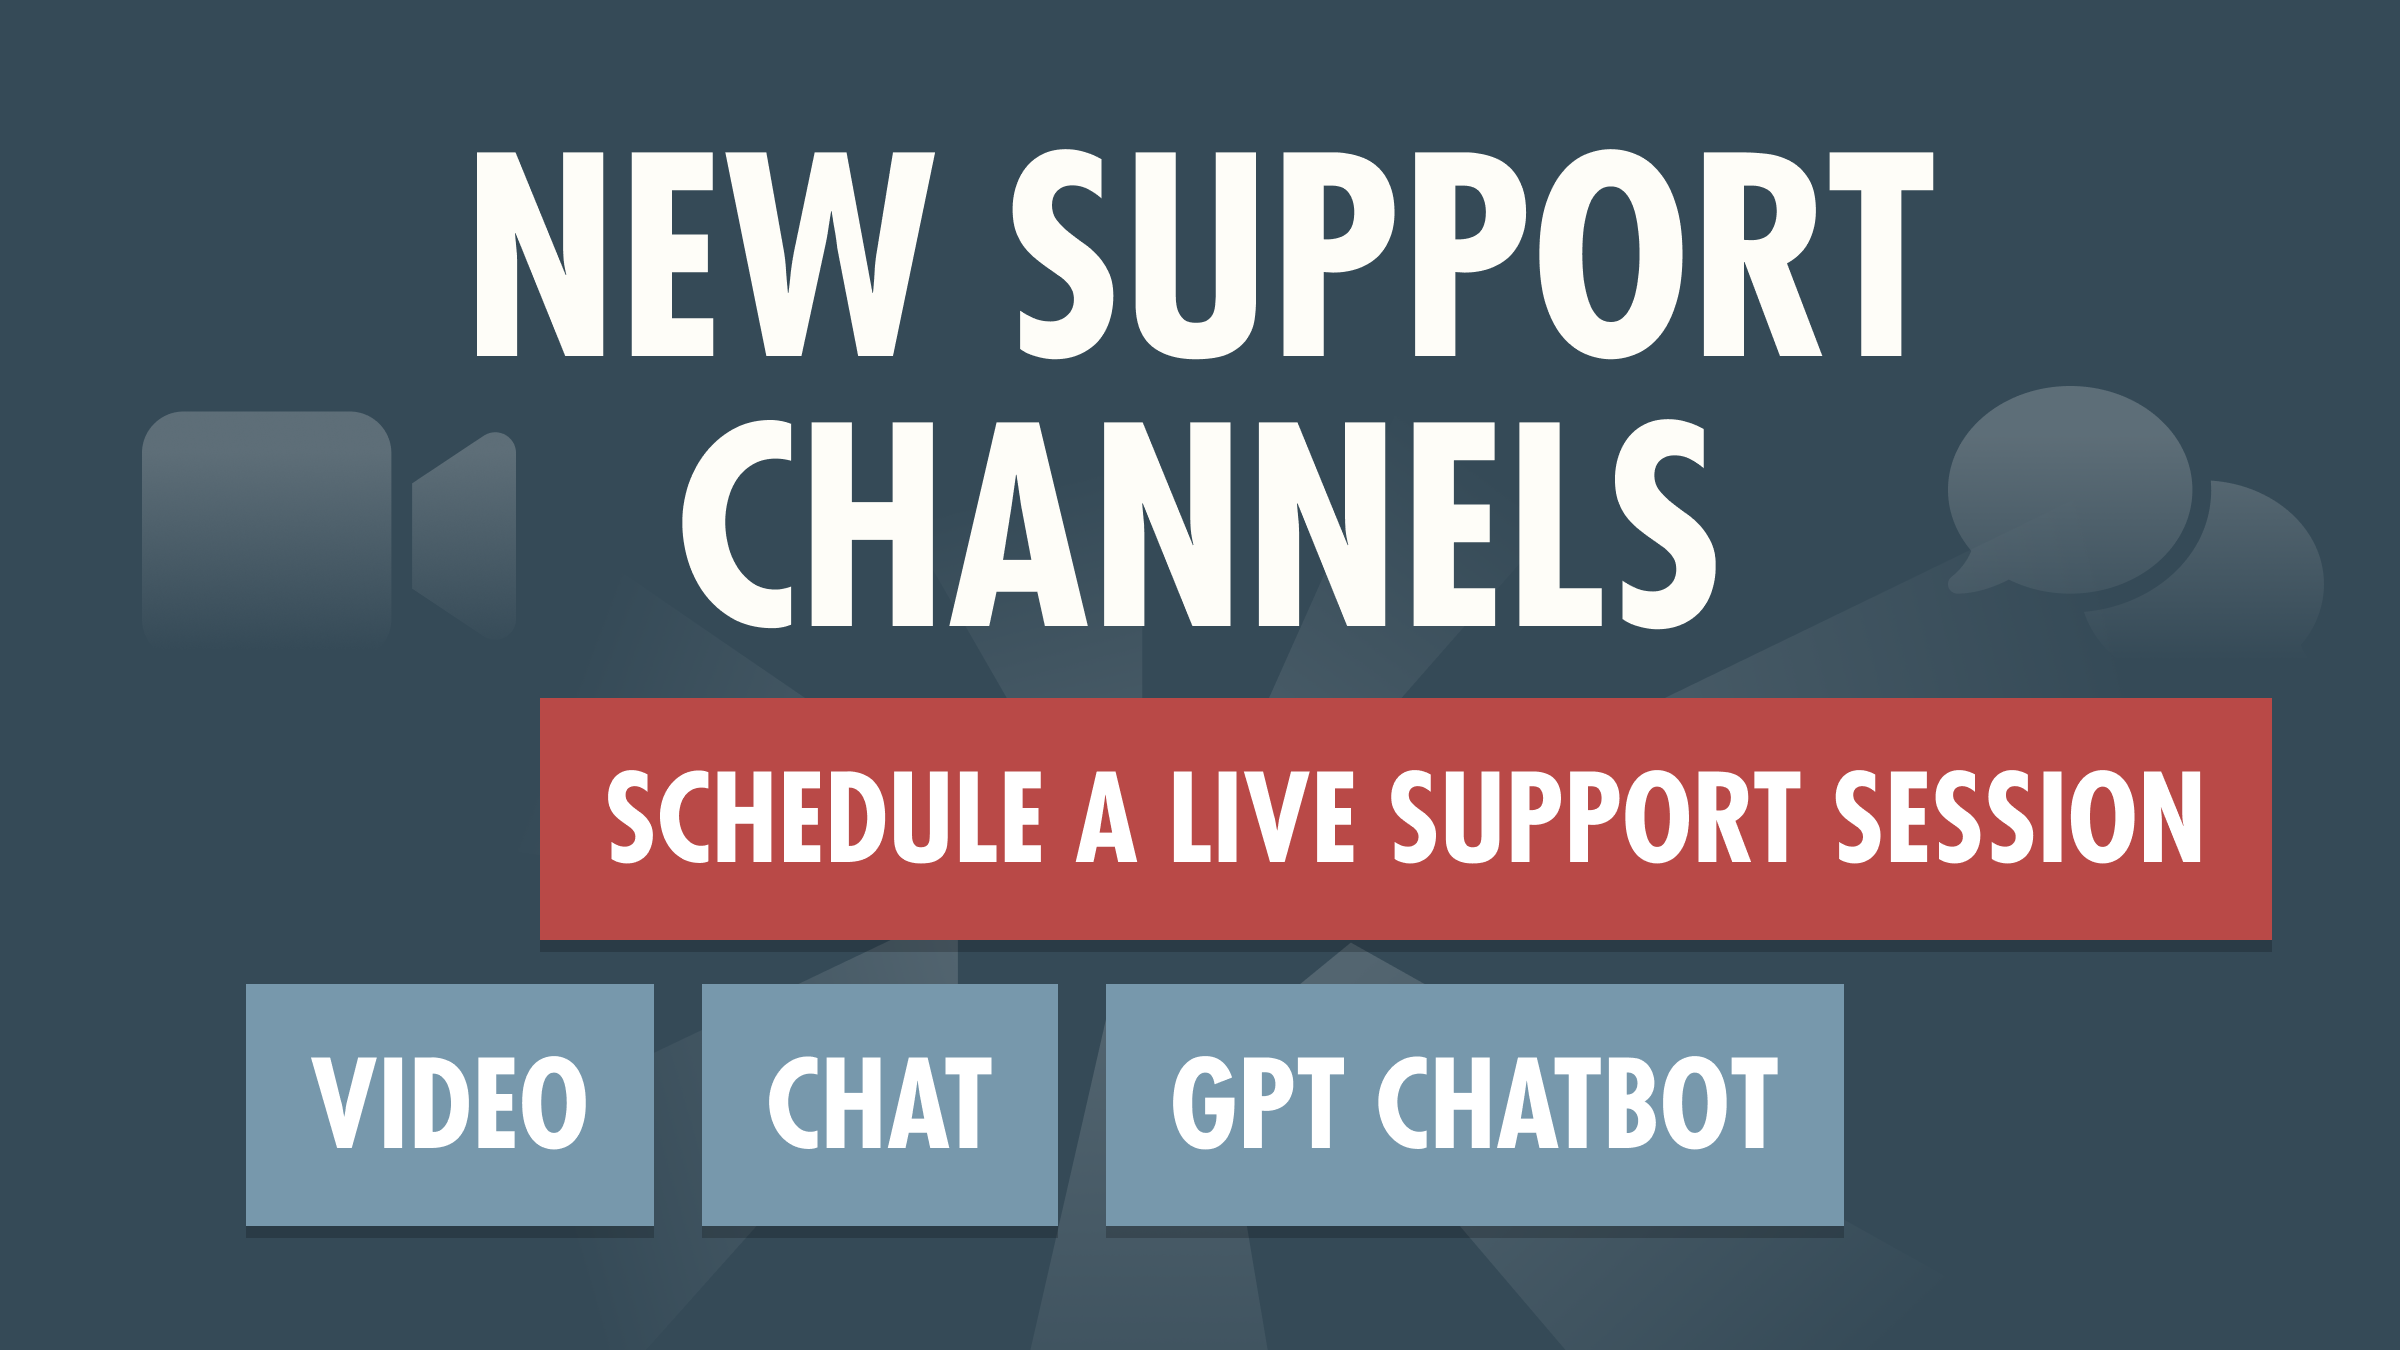 New Support Channels